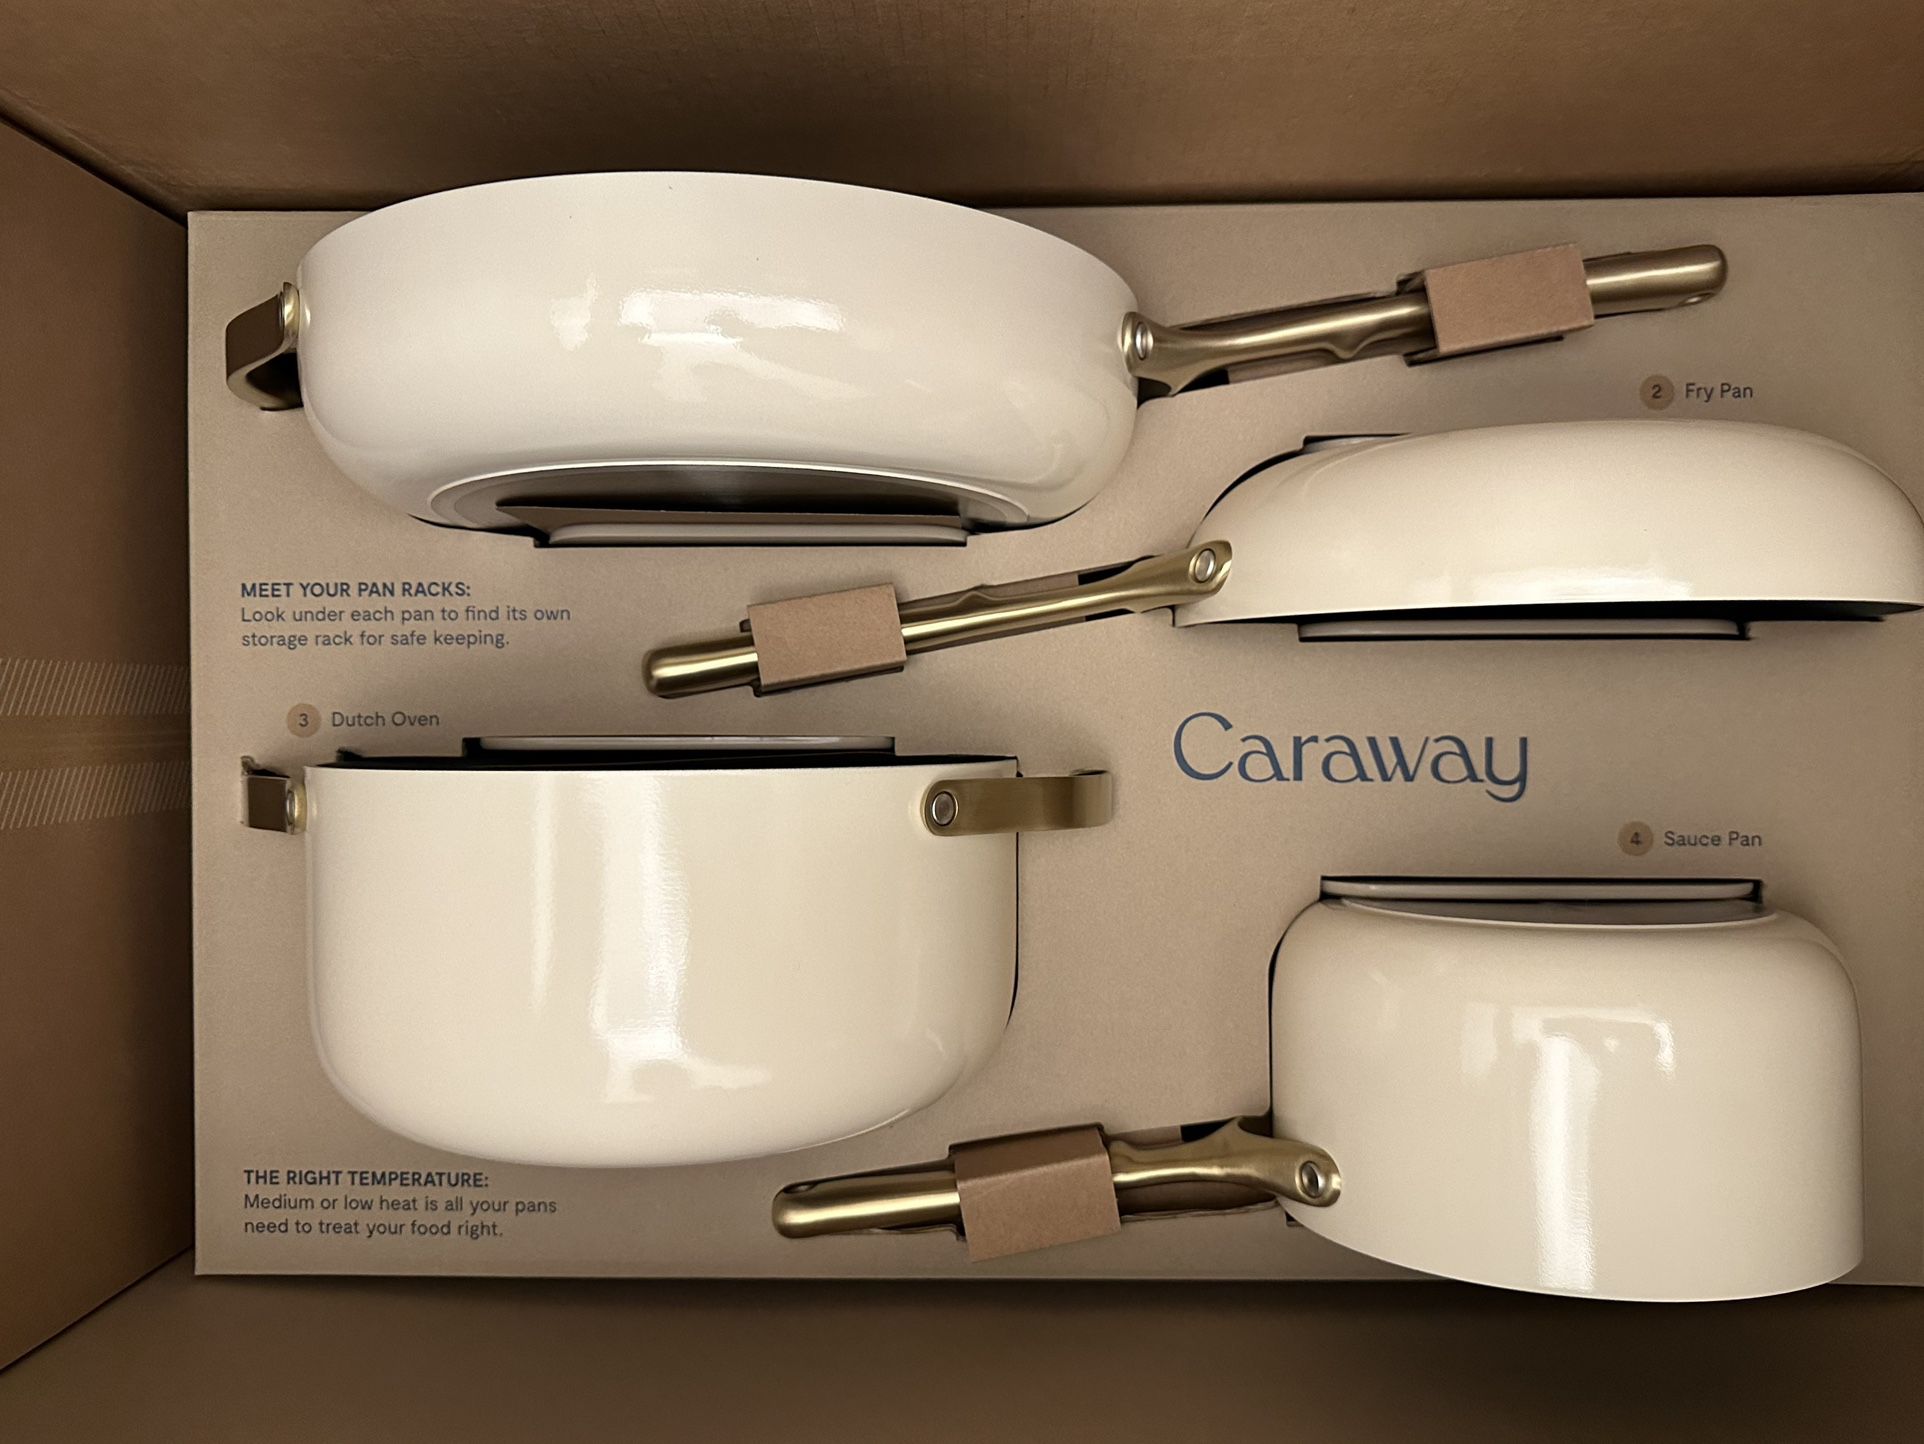 Caraway Home 7-Piece Cream Ceramic Non-Stick Cookware Set with Gold  Hardware for Sale in Bonita, CA - OfferUp